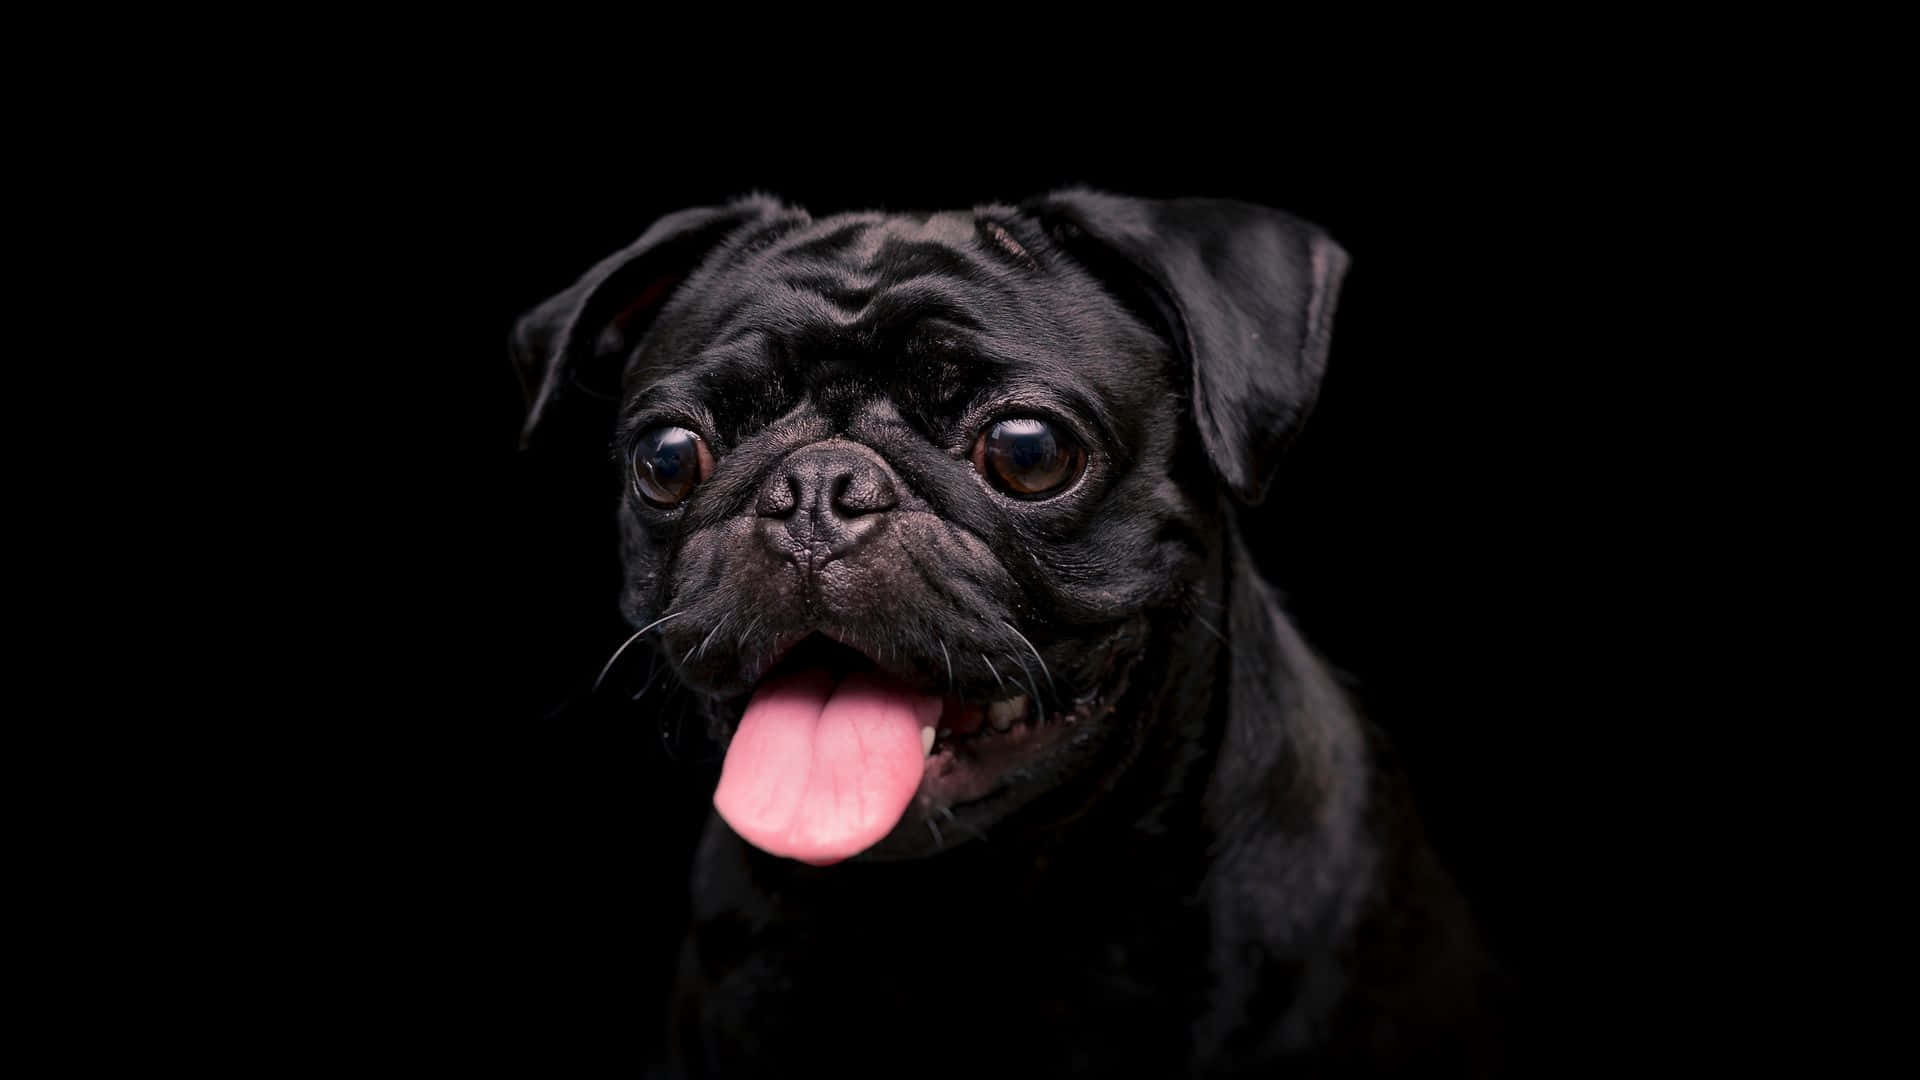 Black Pug Dog With Tongue Out Wallpaper